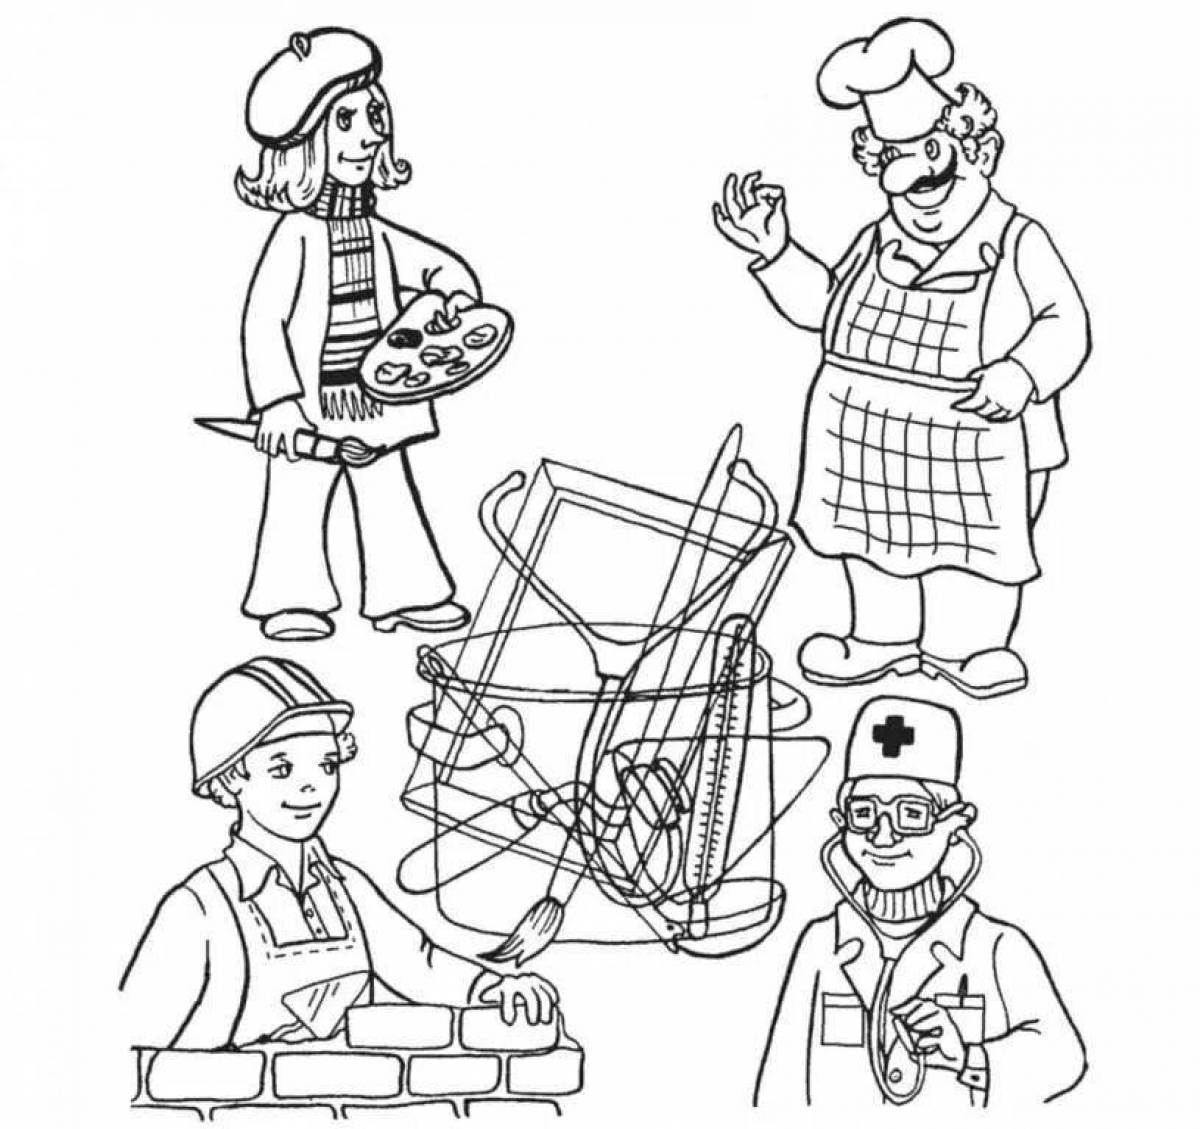 Chef coloring book